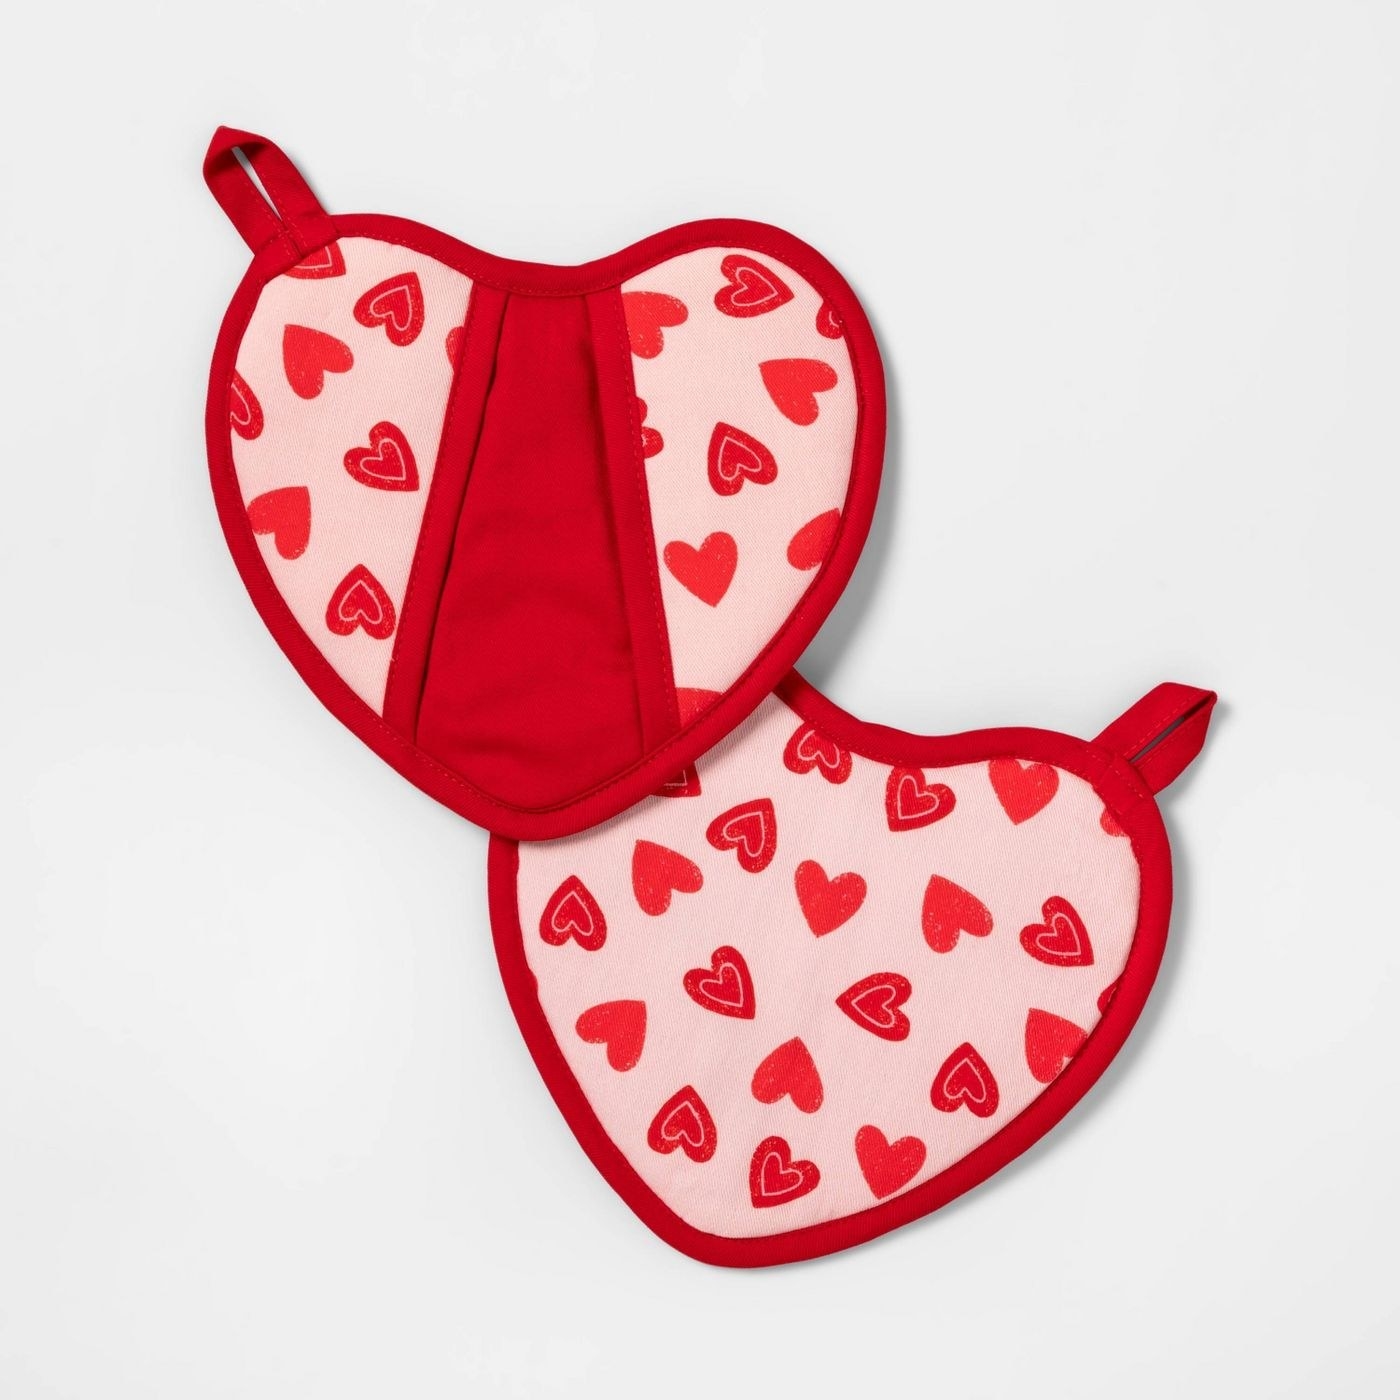 The pot holders, which are heart-shaped, and have red fabric on one side with a shallow pocket for the hand, and pink fabric with red heart prints on the other side